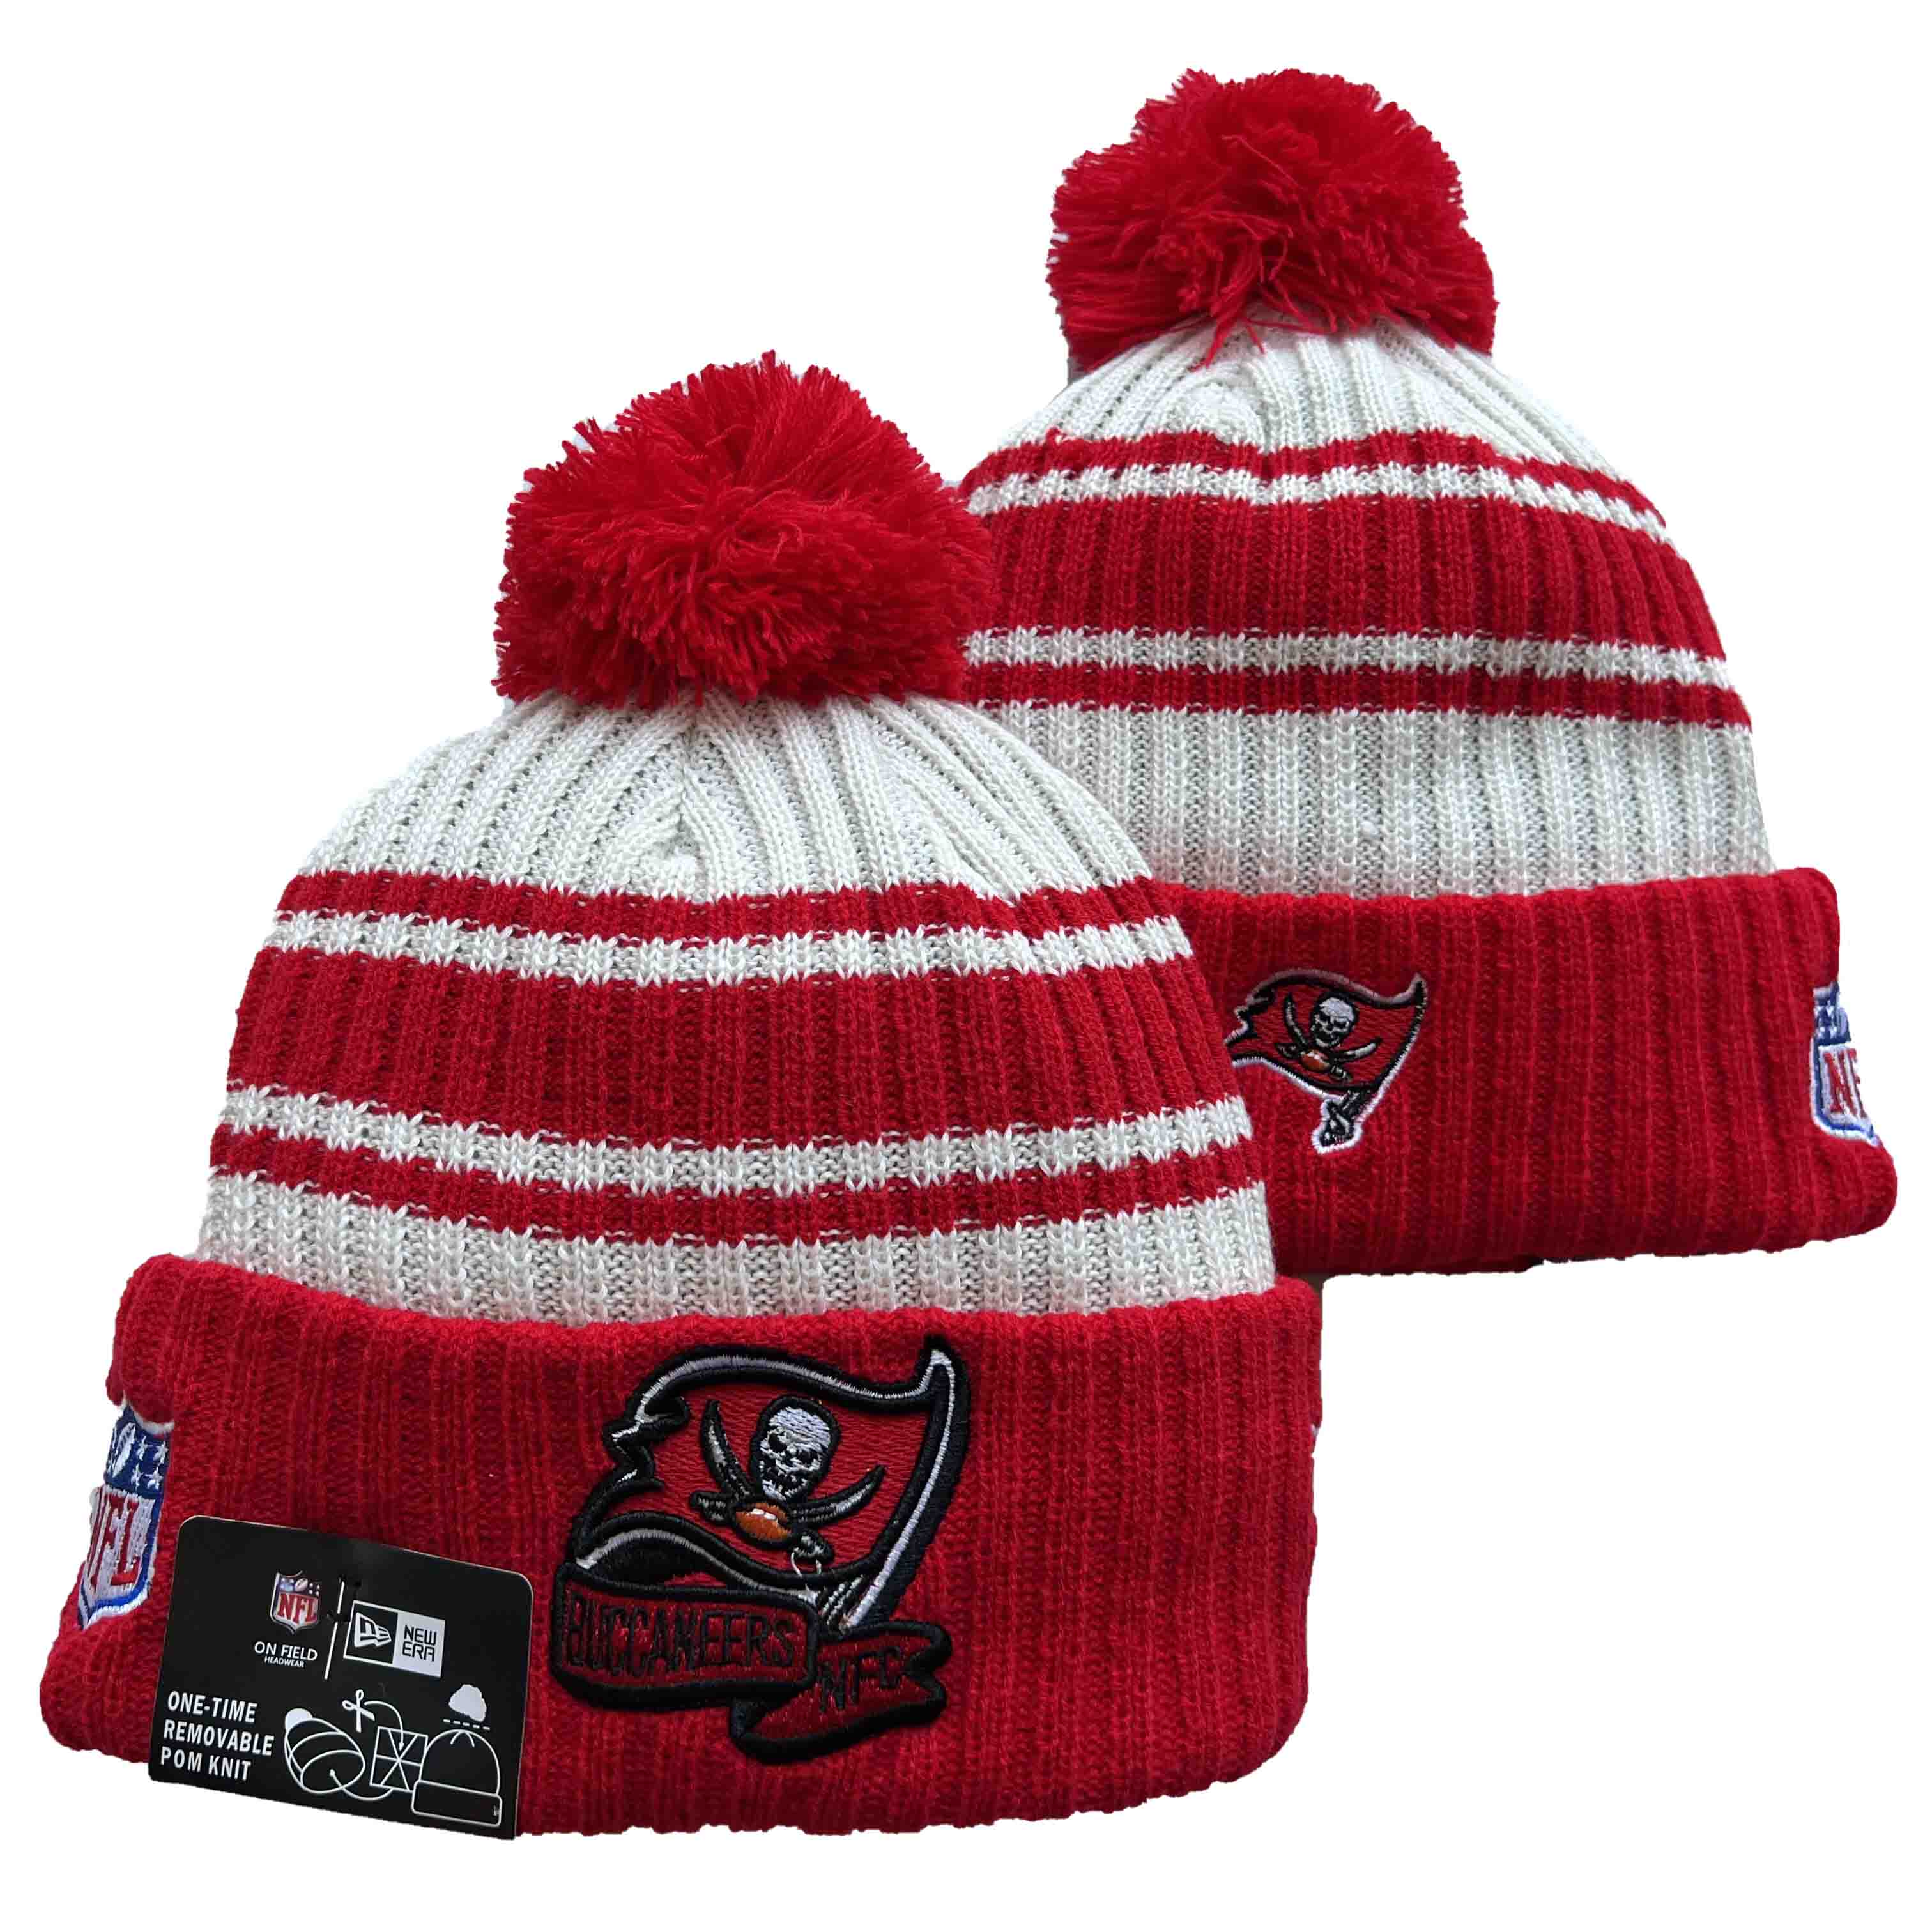 NFL Tampa Bay Buccaneers Beanies Knit Hats-YD1285